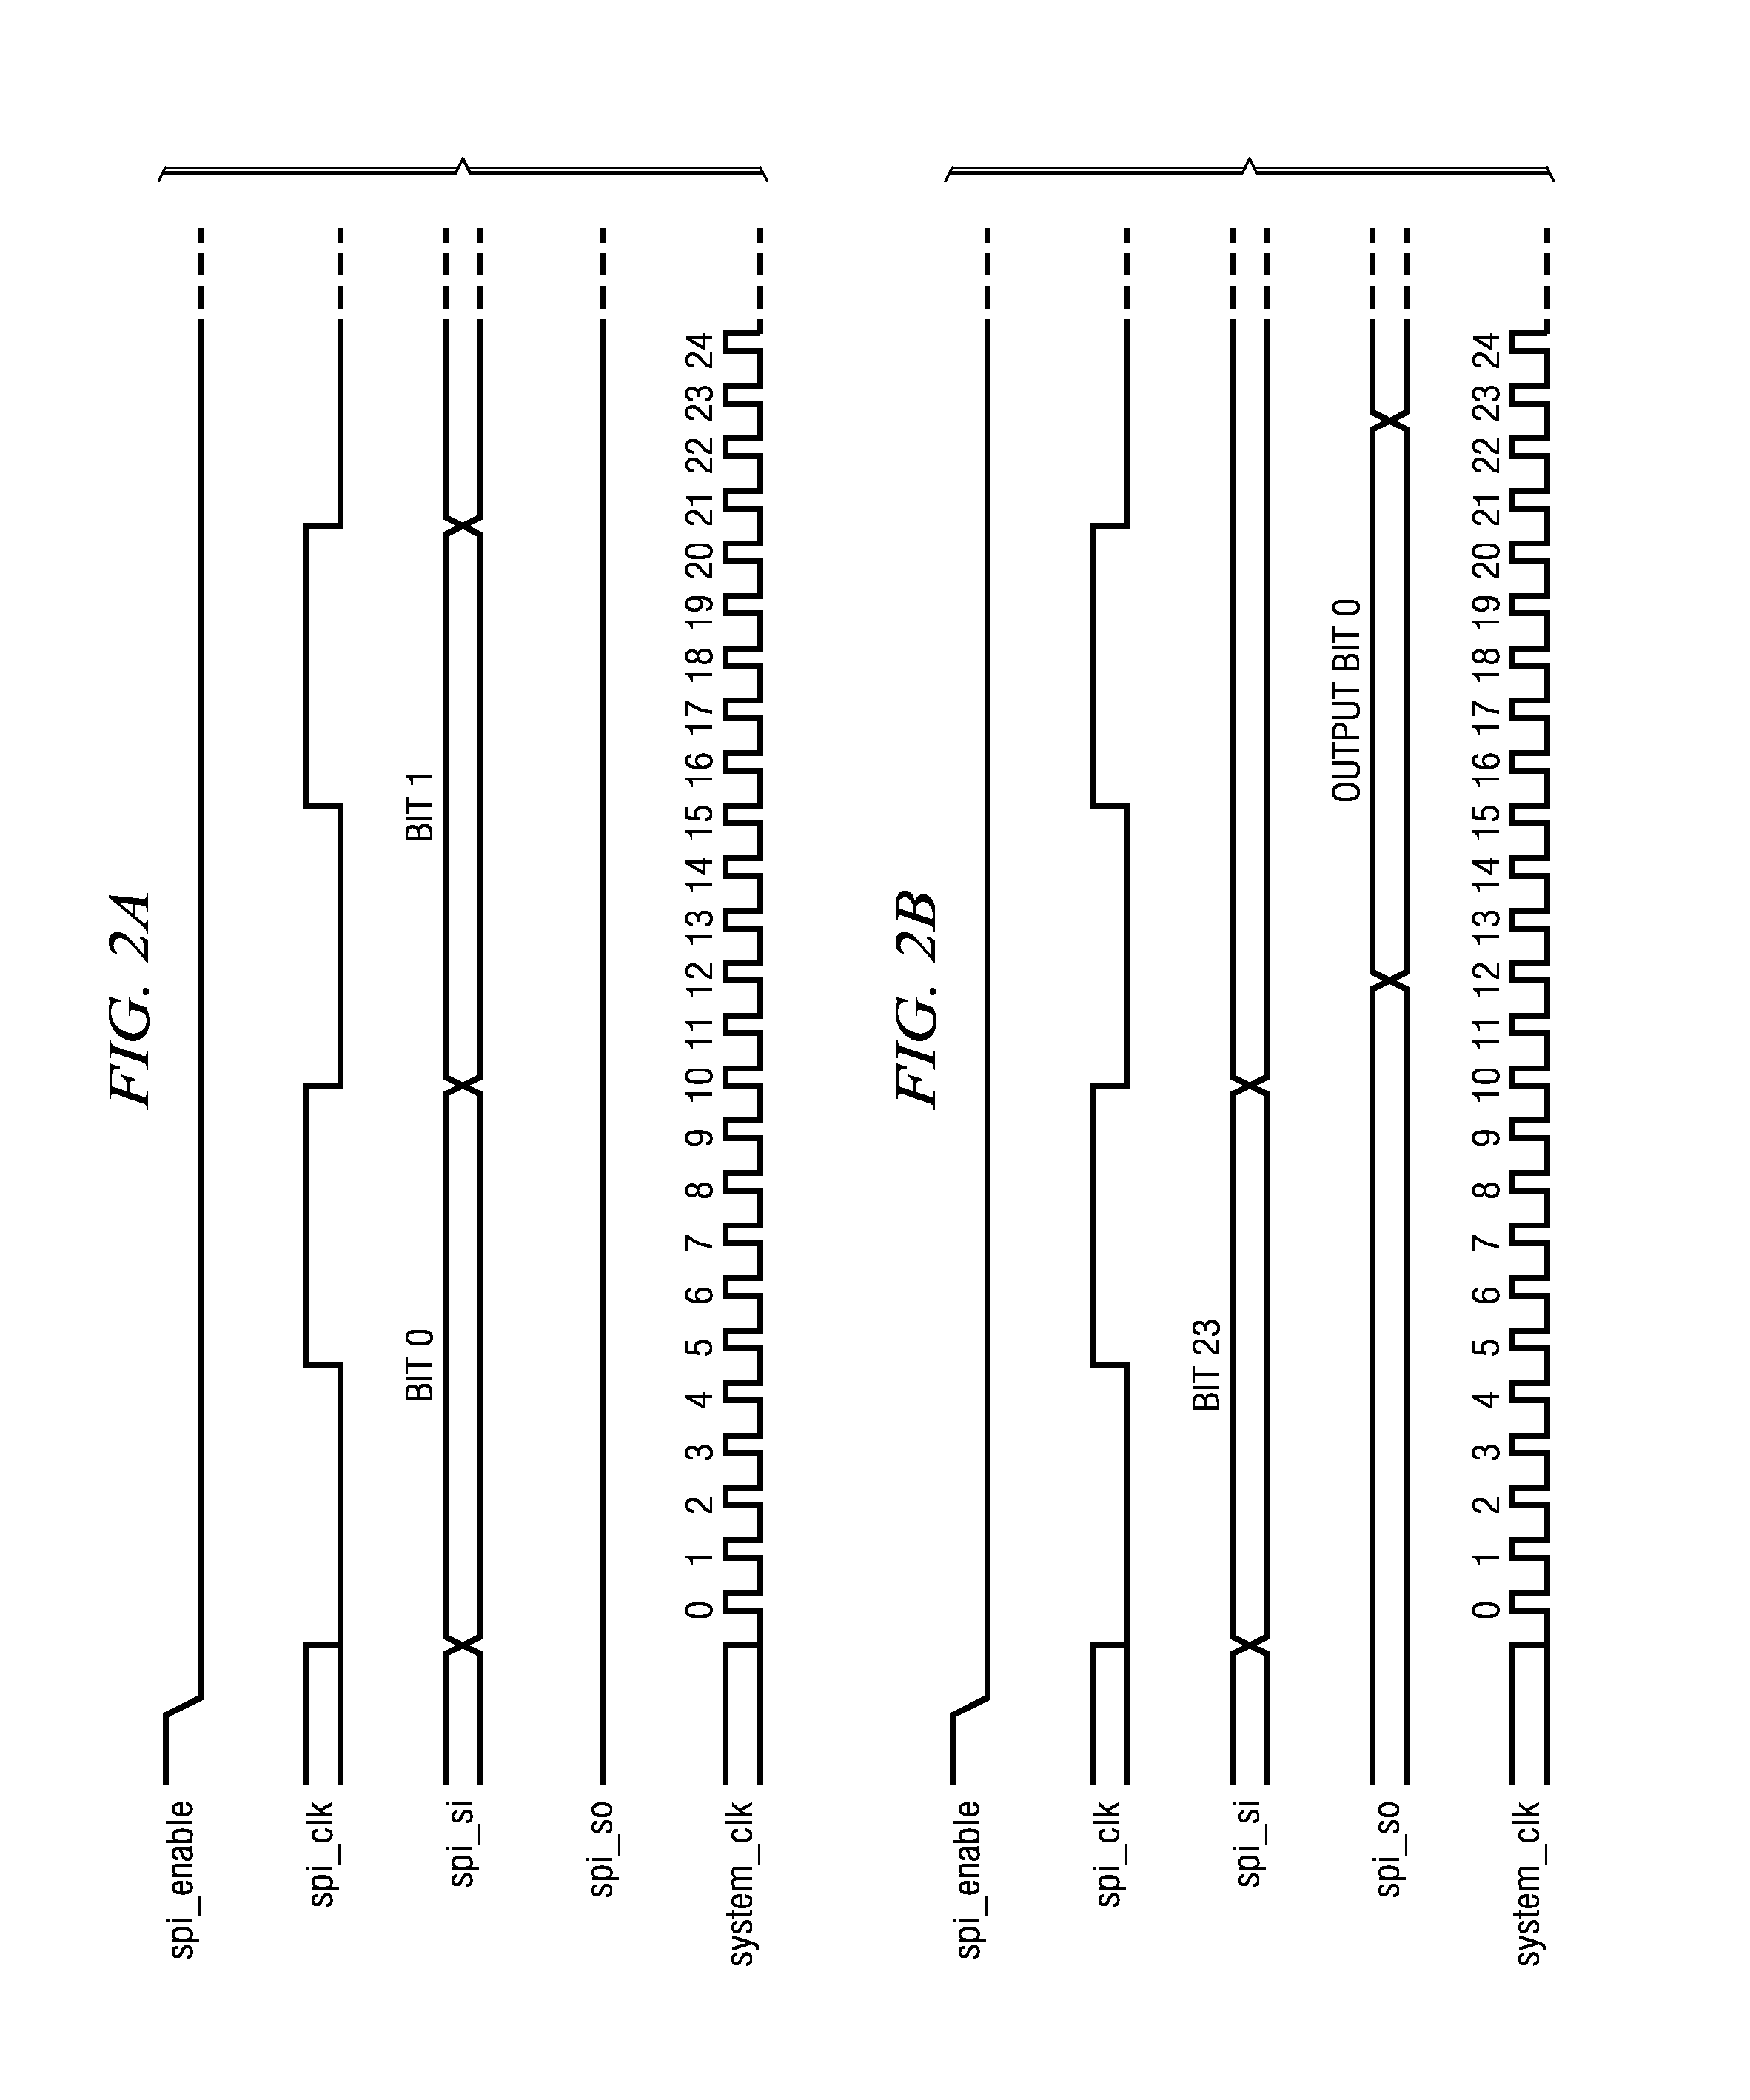 High Speed On-Chip Serial Link Apparatus